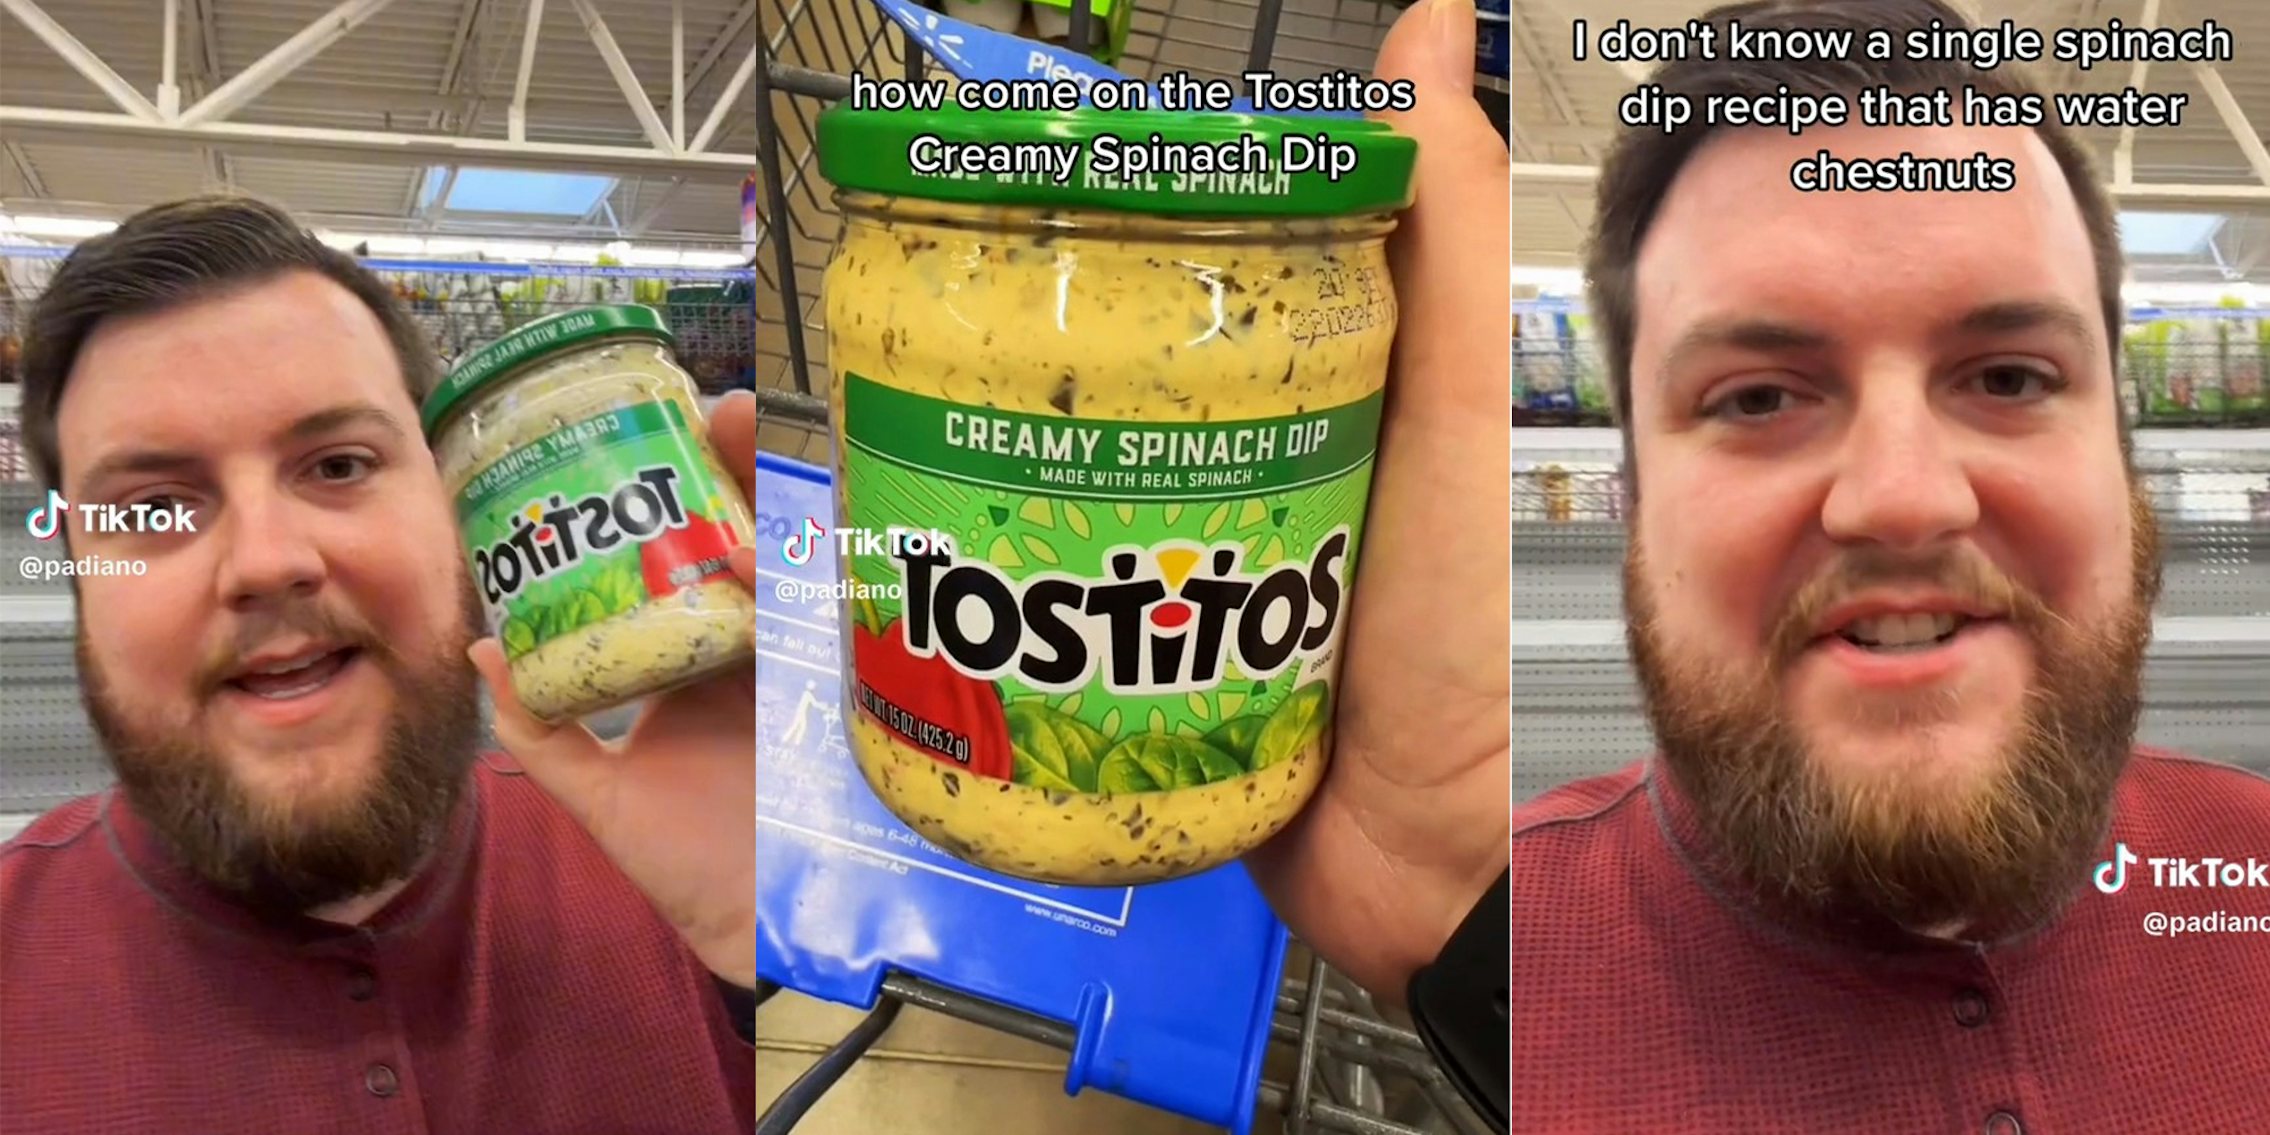 Customer shows Tostitos creamy spinach dip was water chestnuts